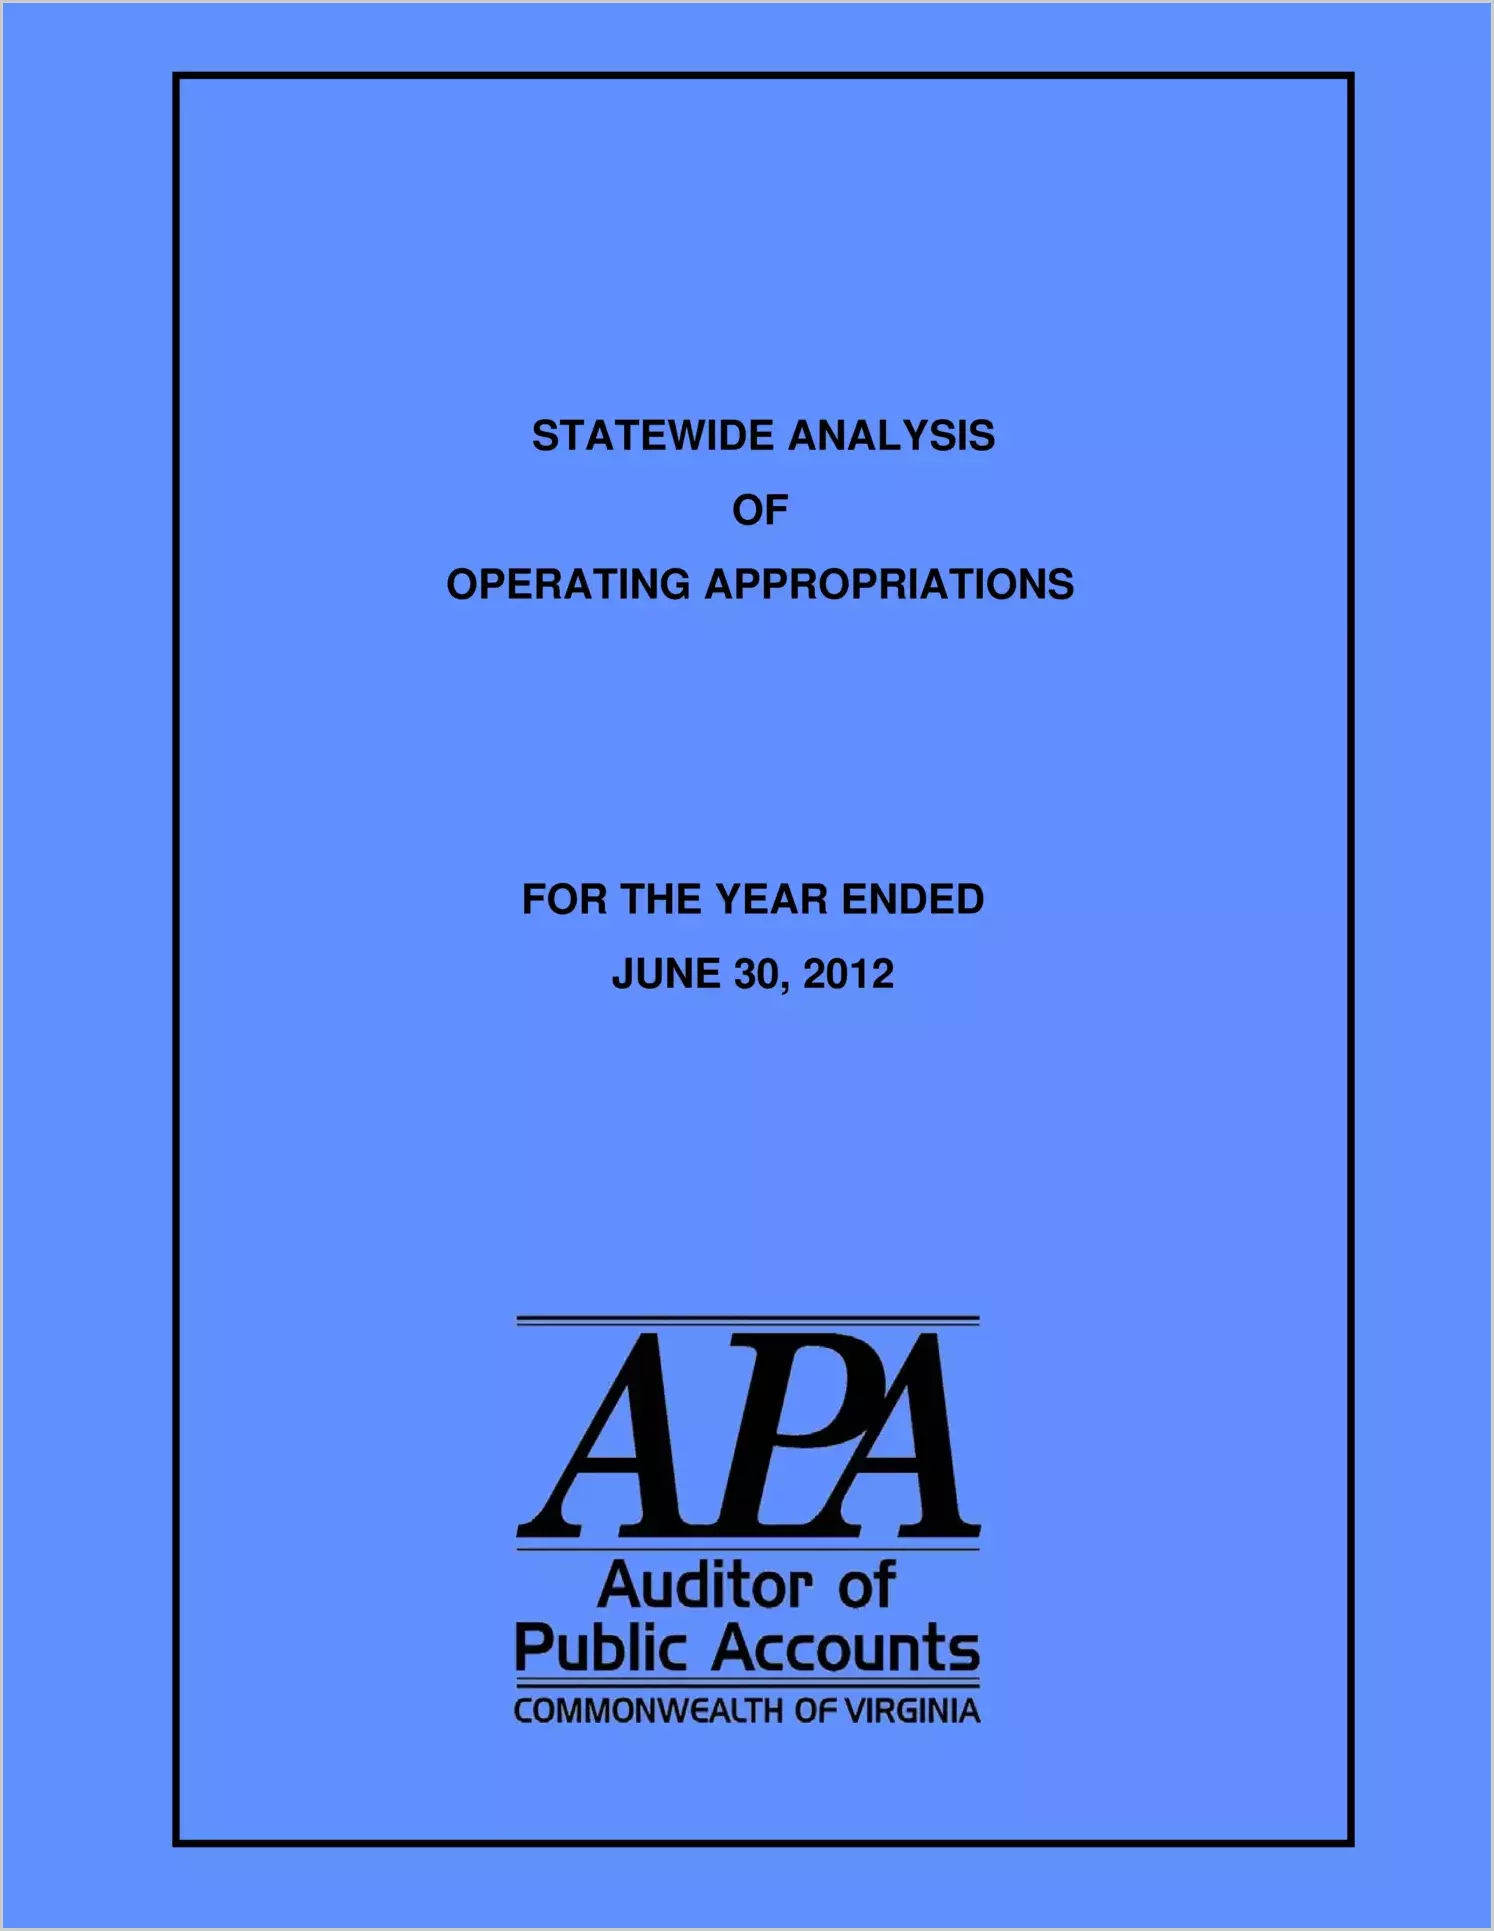 Statewide Analysis of Operating Appropriation Adjustments for the  year ended June 30, 2012